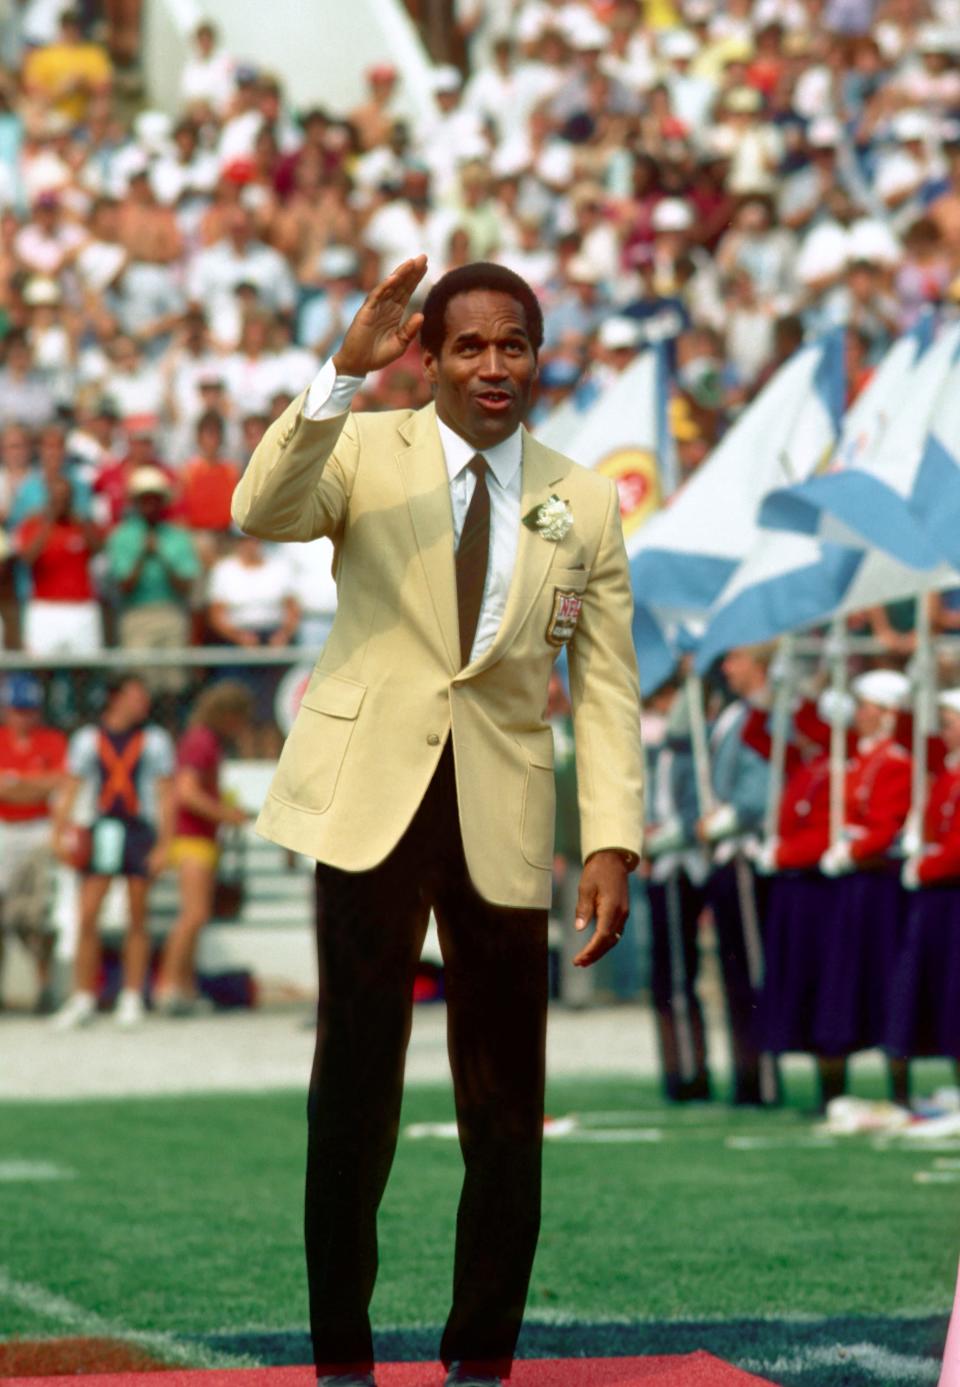 O.J. Simpson waves to fans as he is introduced at Fawcett Stadium during the Pro Football Hall of Fame Game, Aug. 3, 1985.